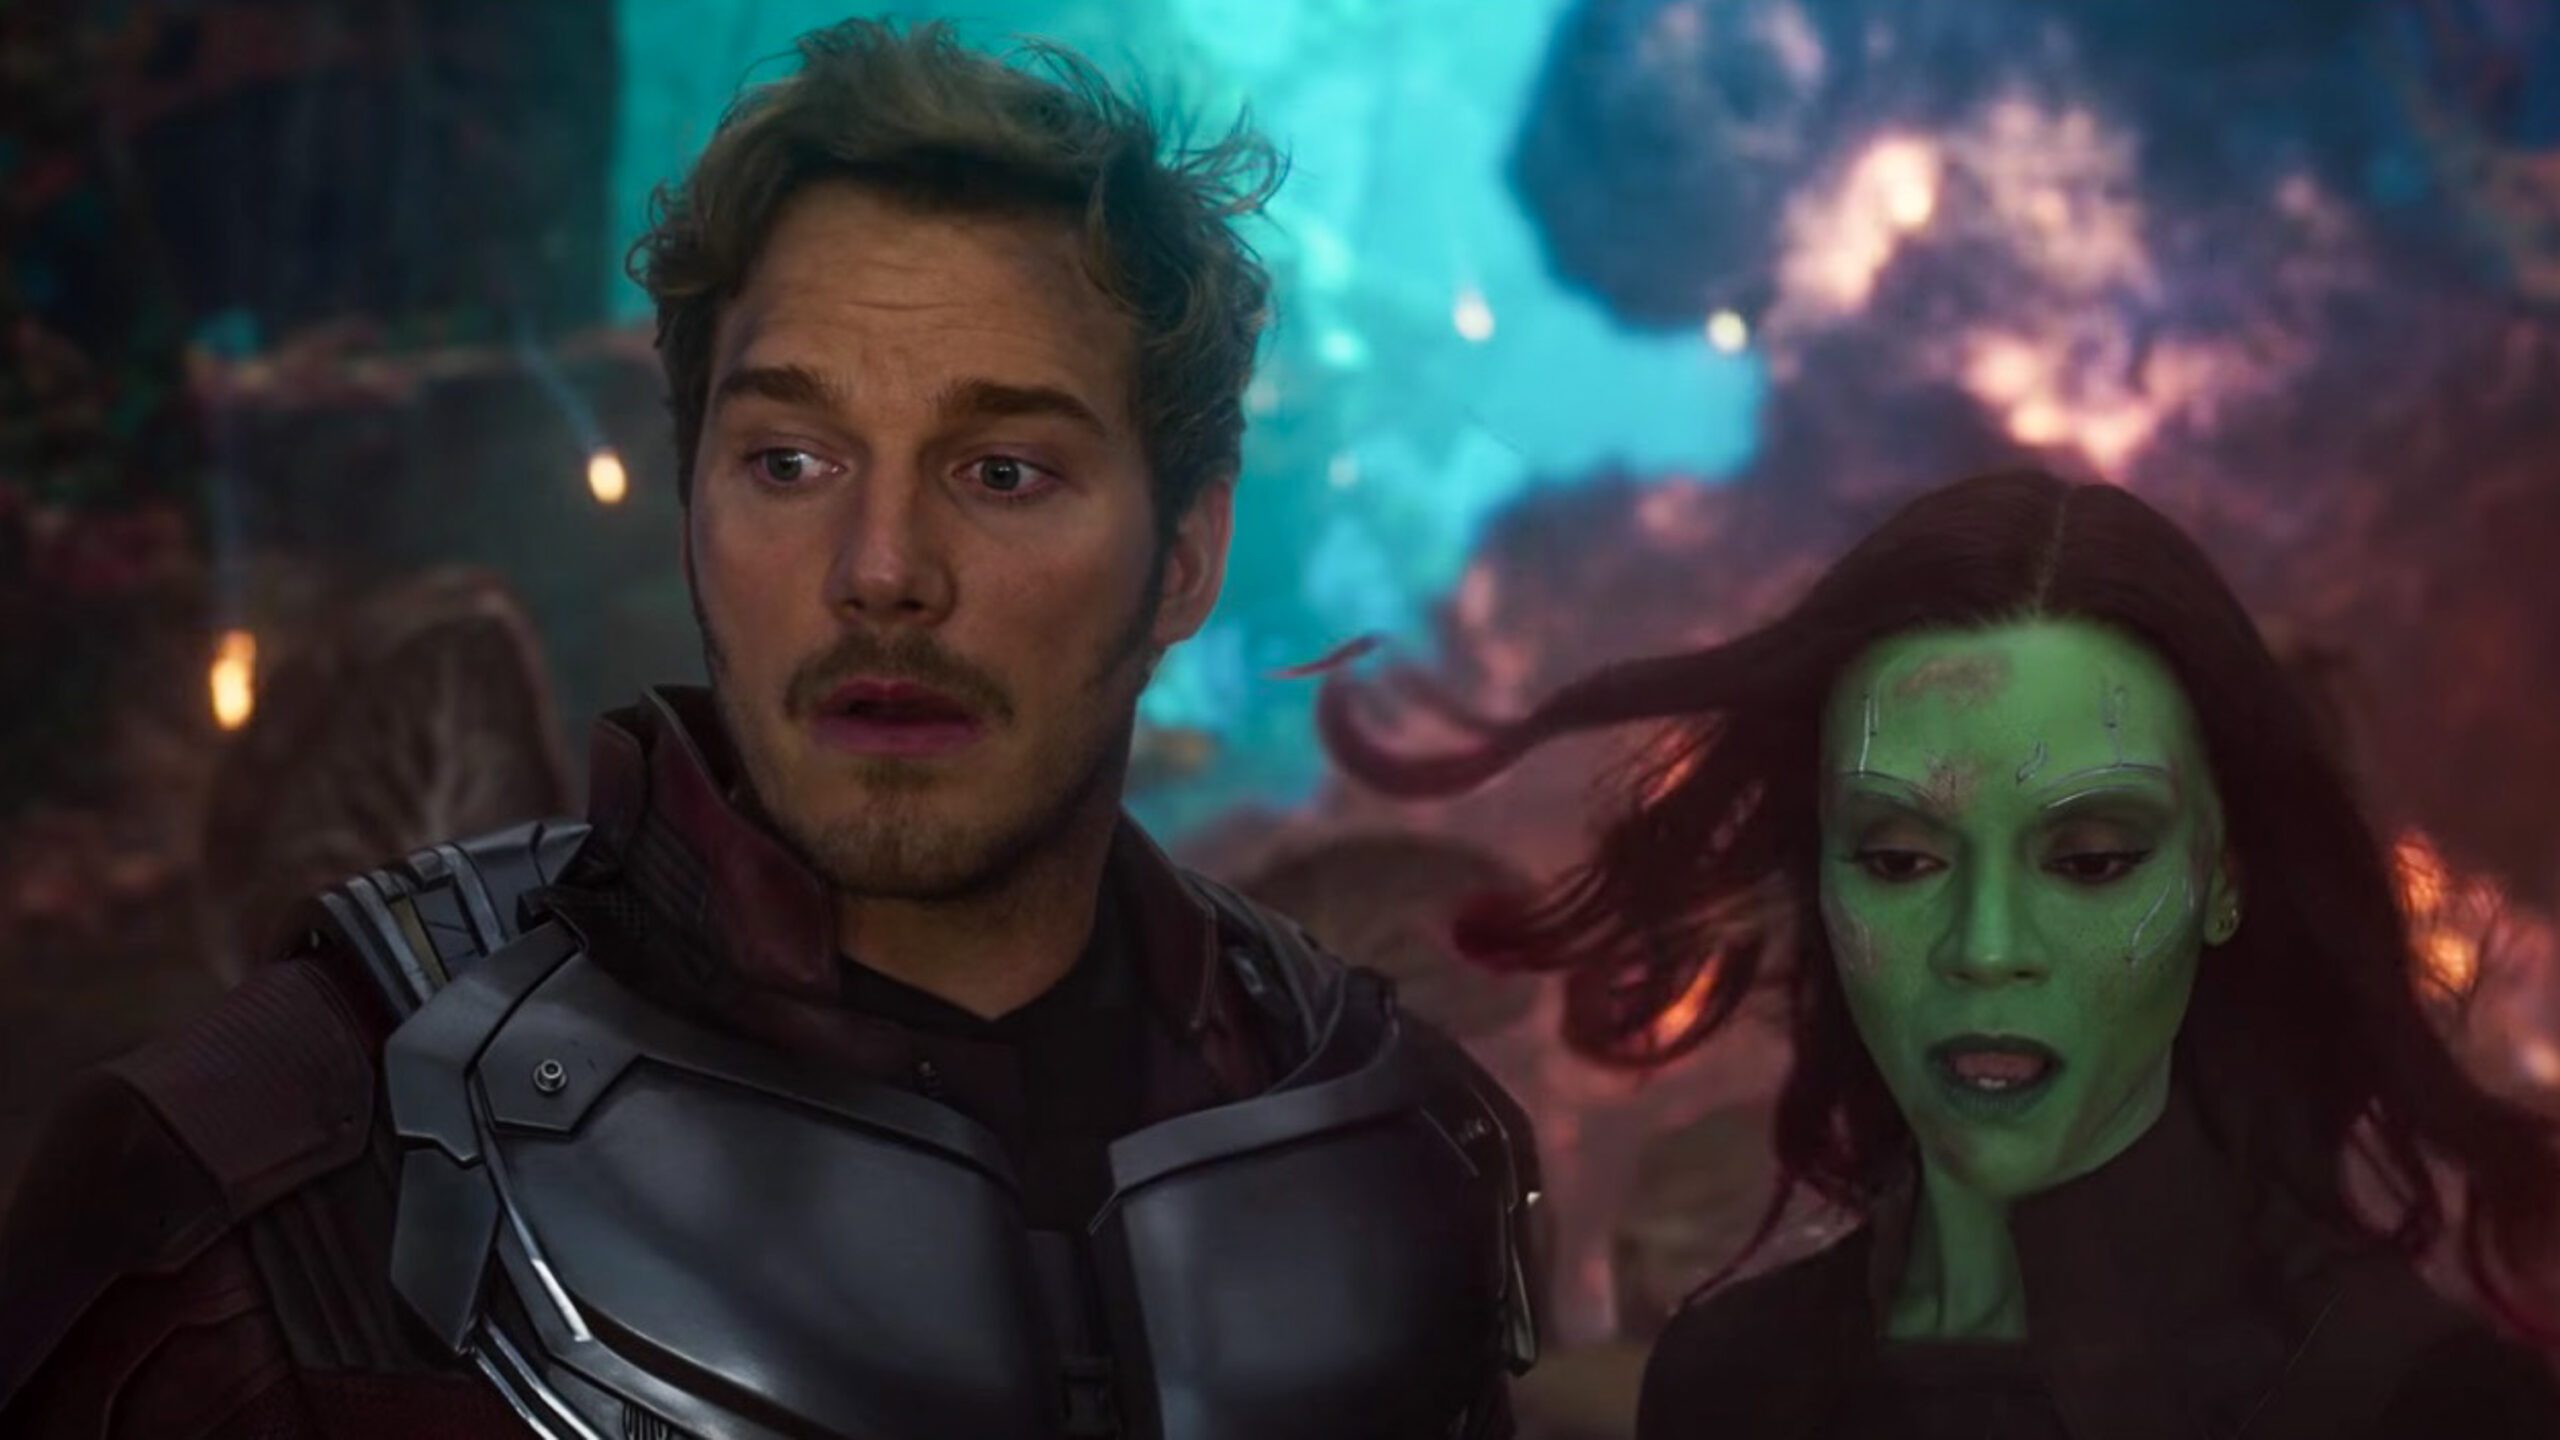 WATCH: New characters in ‘Guardians of the Galaxy Vol. 2’ trailer